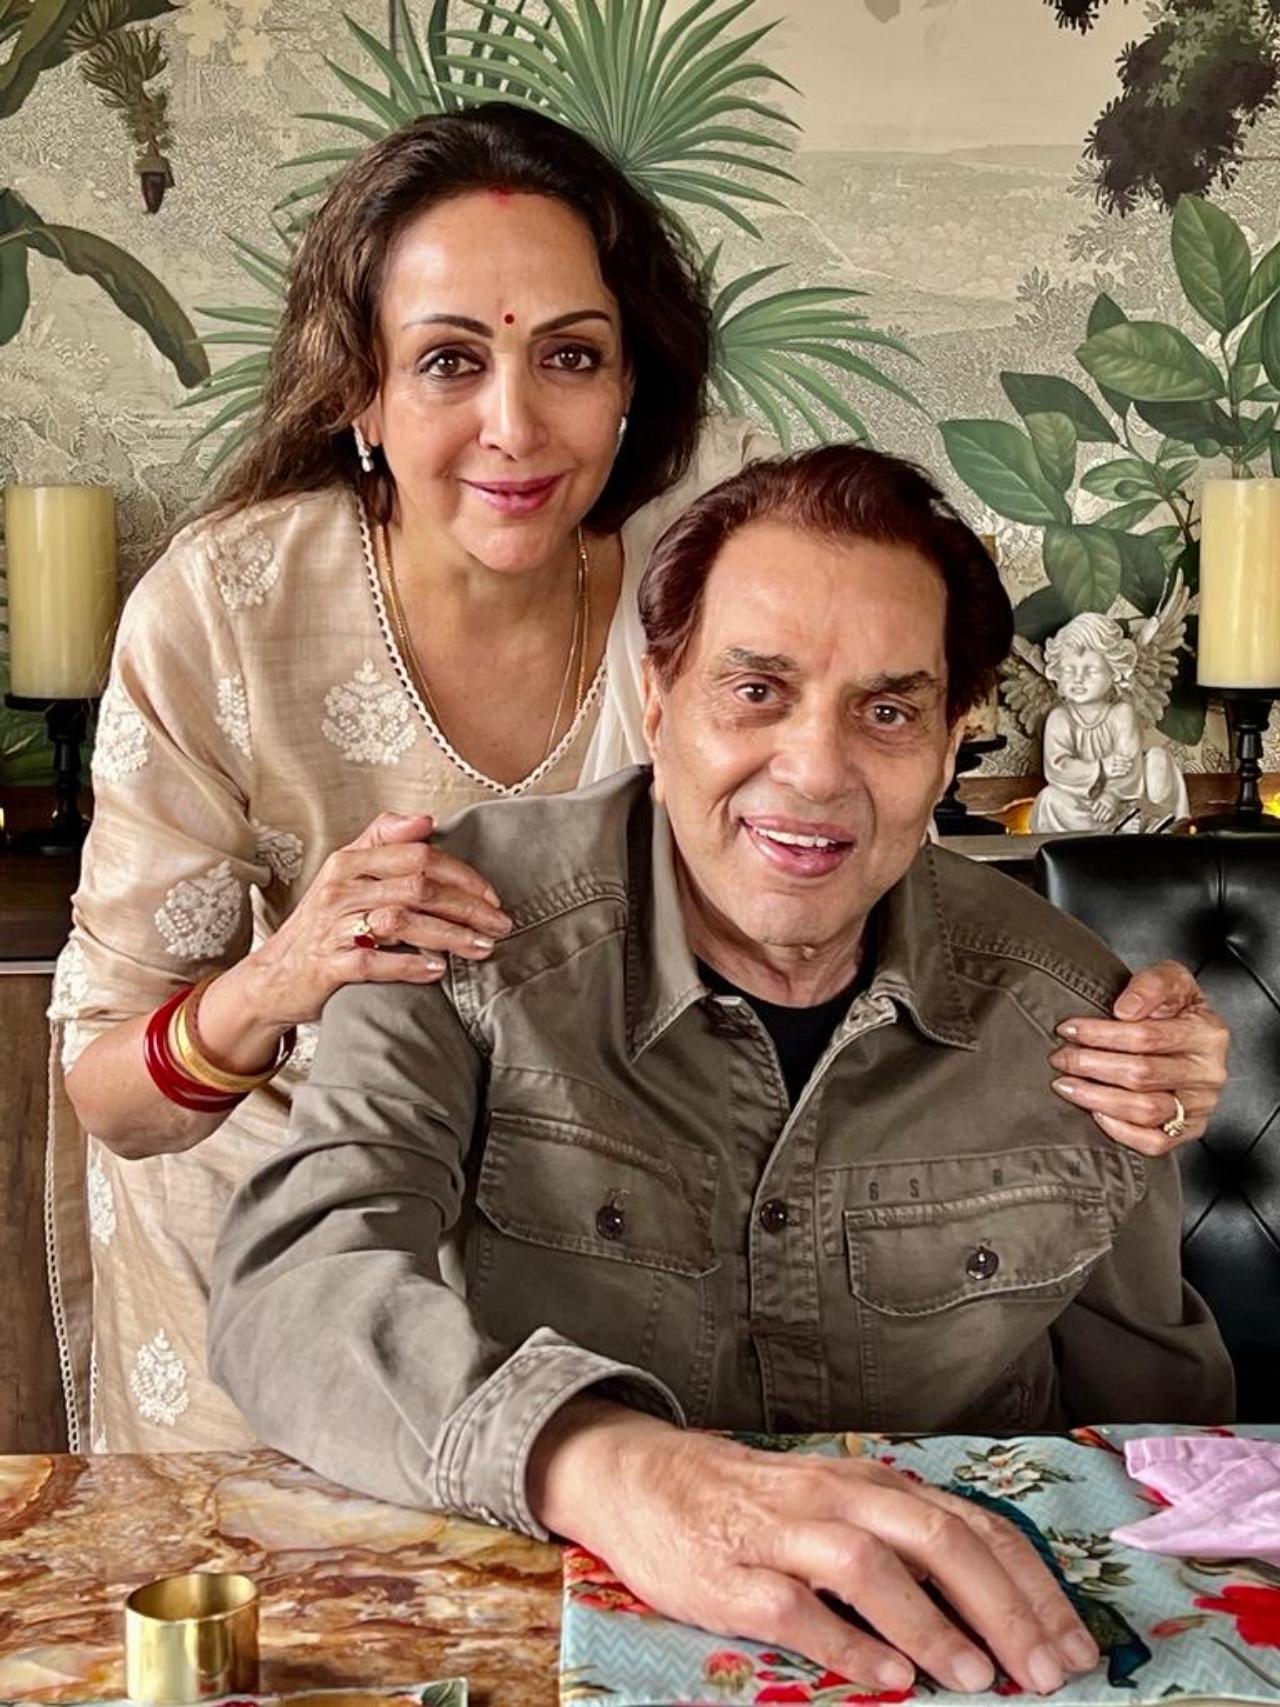 Hema Malini took to her Instagram handle to give glimpses from Dharmendra's birthday celebration at home. The Sholay star had also celebrated his birthday with his sons Sunny and Bobby Deol in the day with a puja ceremony